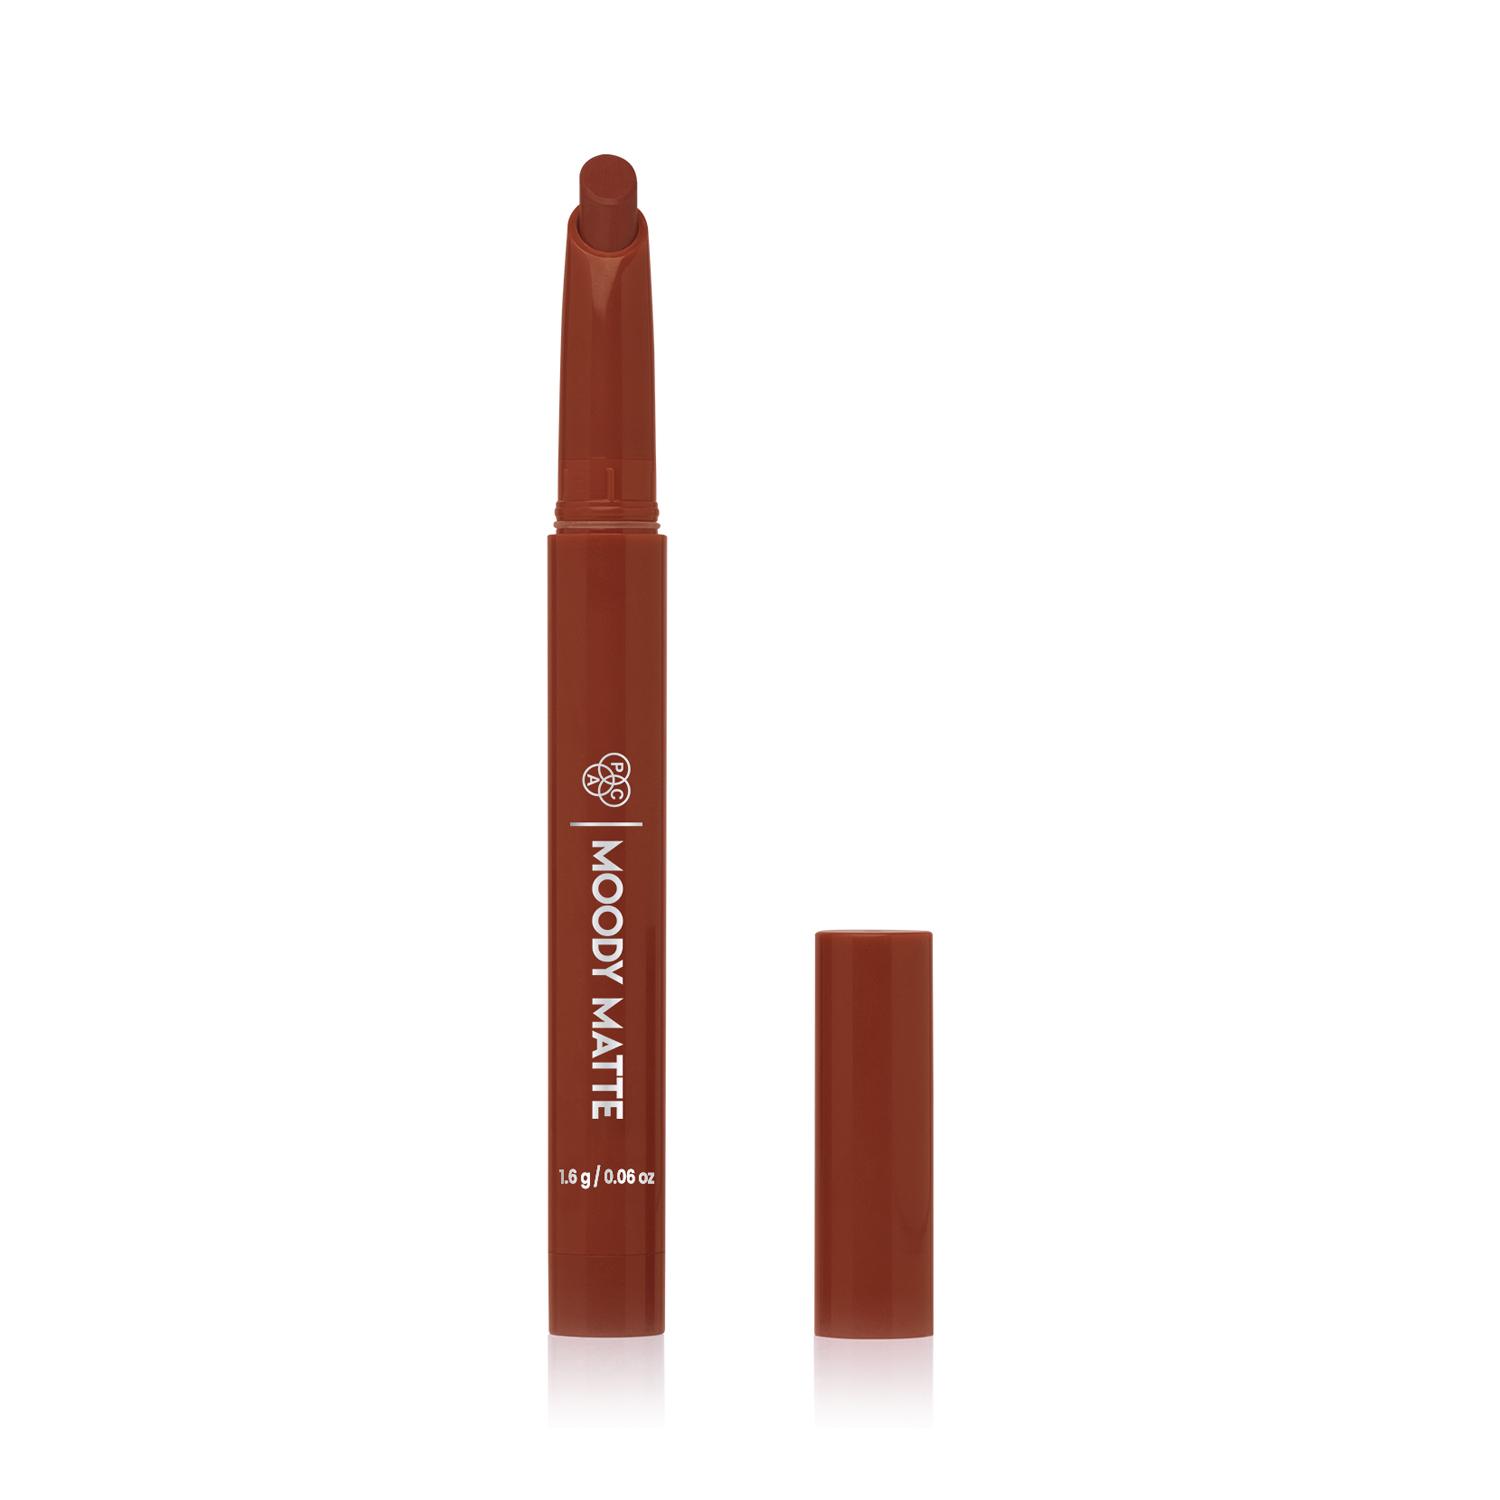 PAC | PAC Moody Matte Lipstick - Pool Party (1.6g)